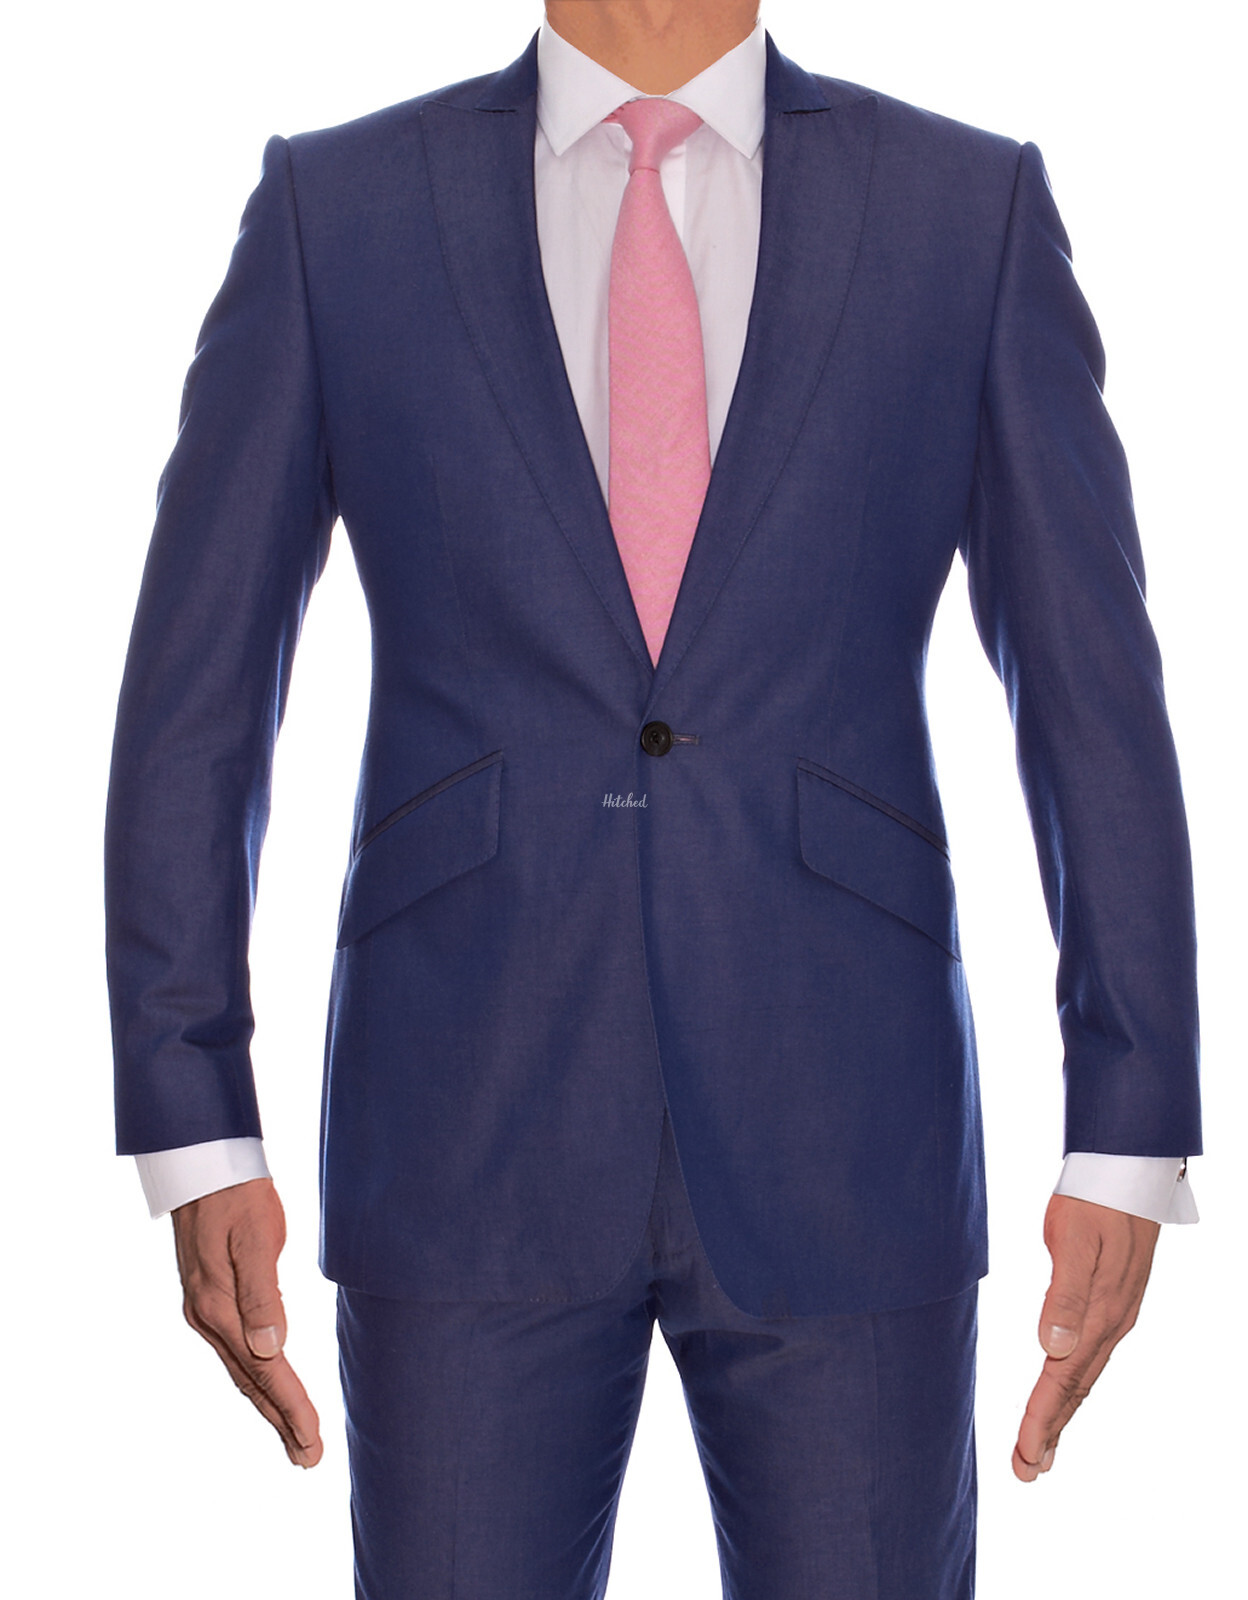 Light Weight Denim Mens Wedding Suit from Adam Waite - hitched.co.uk